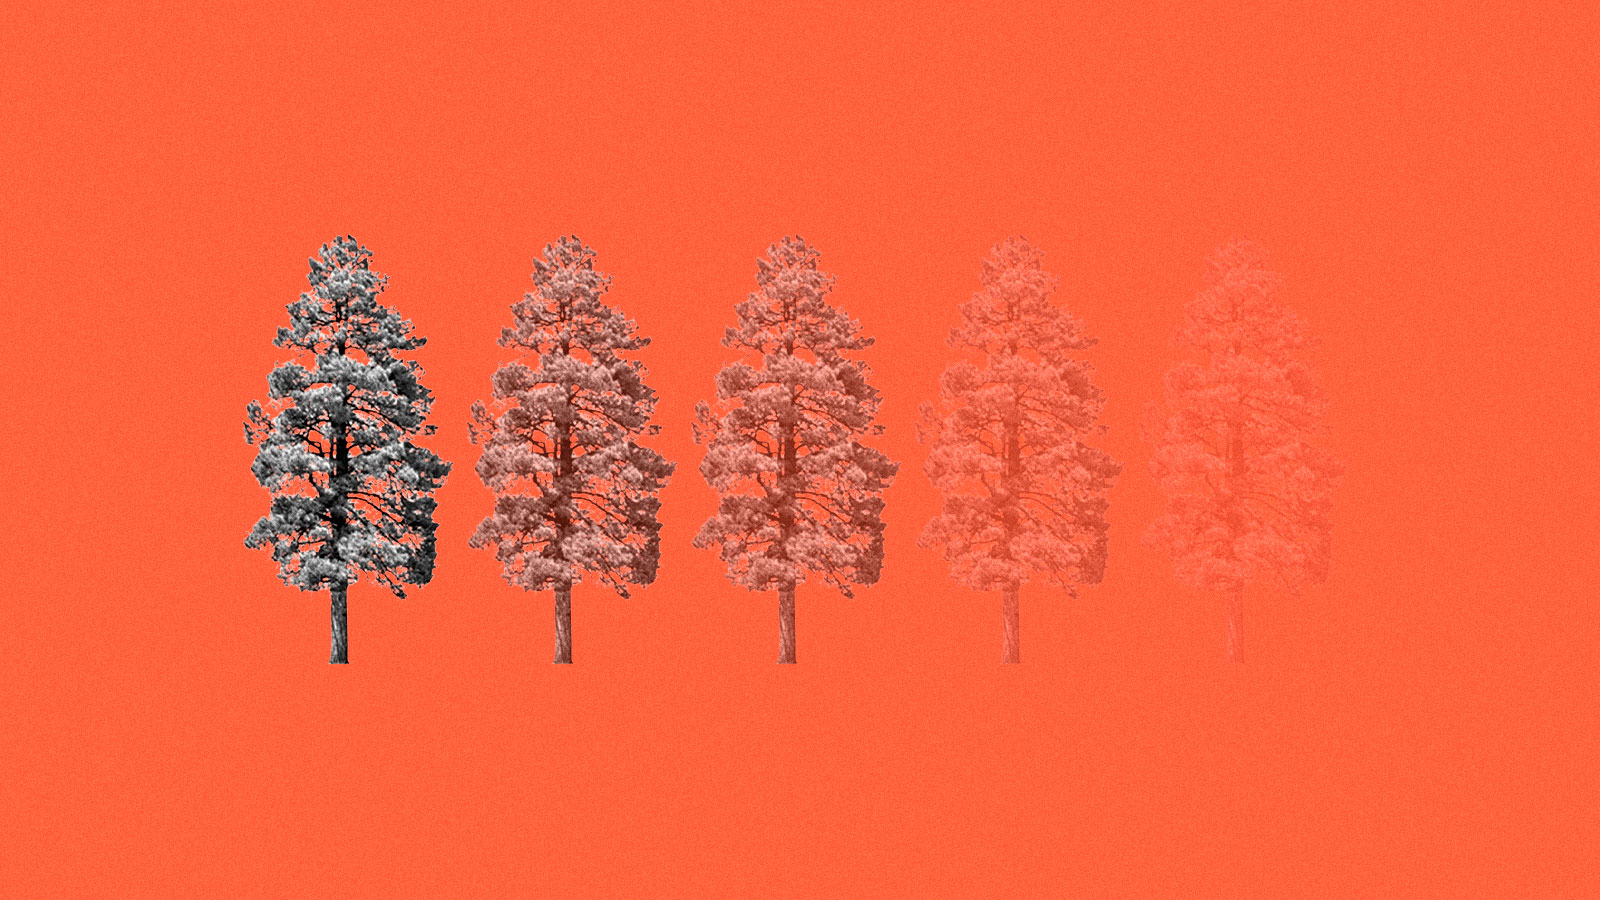 Fading trees on red background